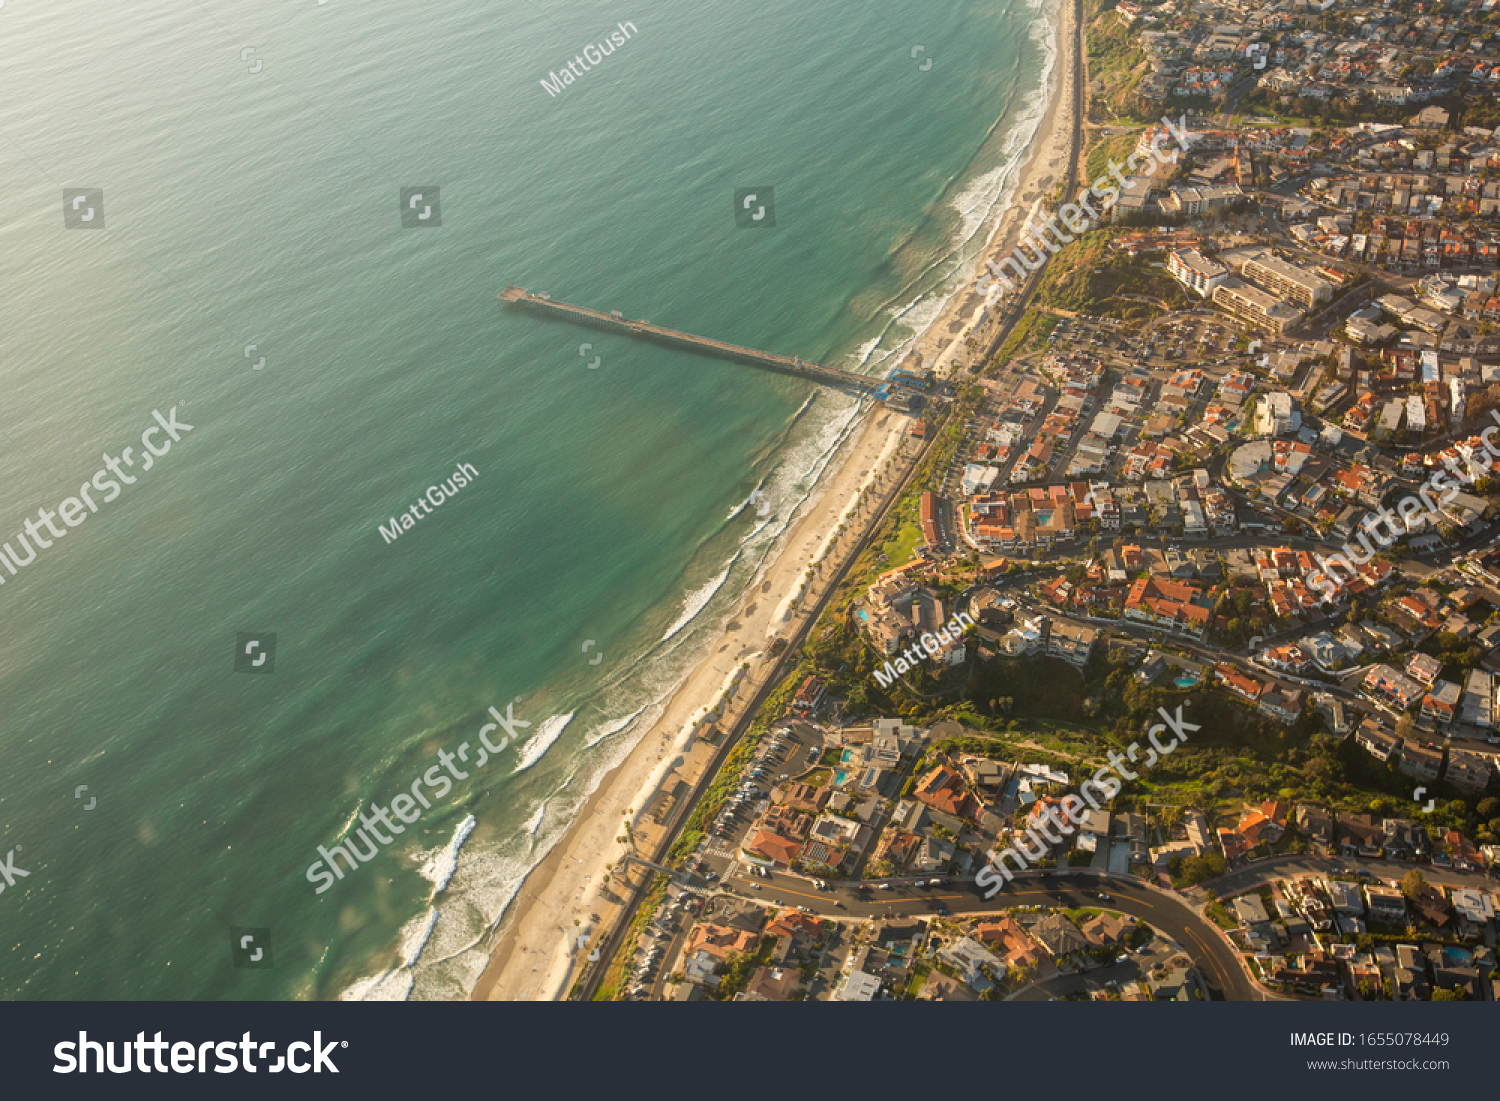 Aerial view of the San Clemente, California skyline featuring the San Clemente Pier. #1655078449